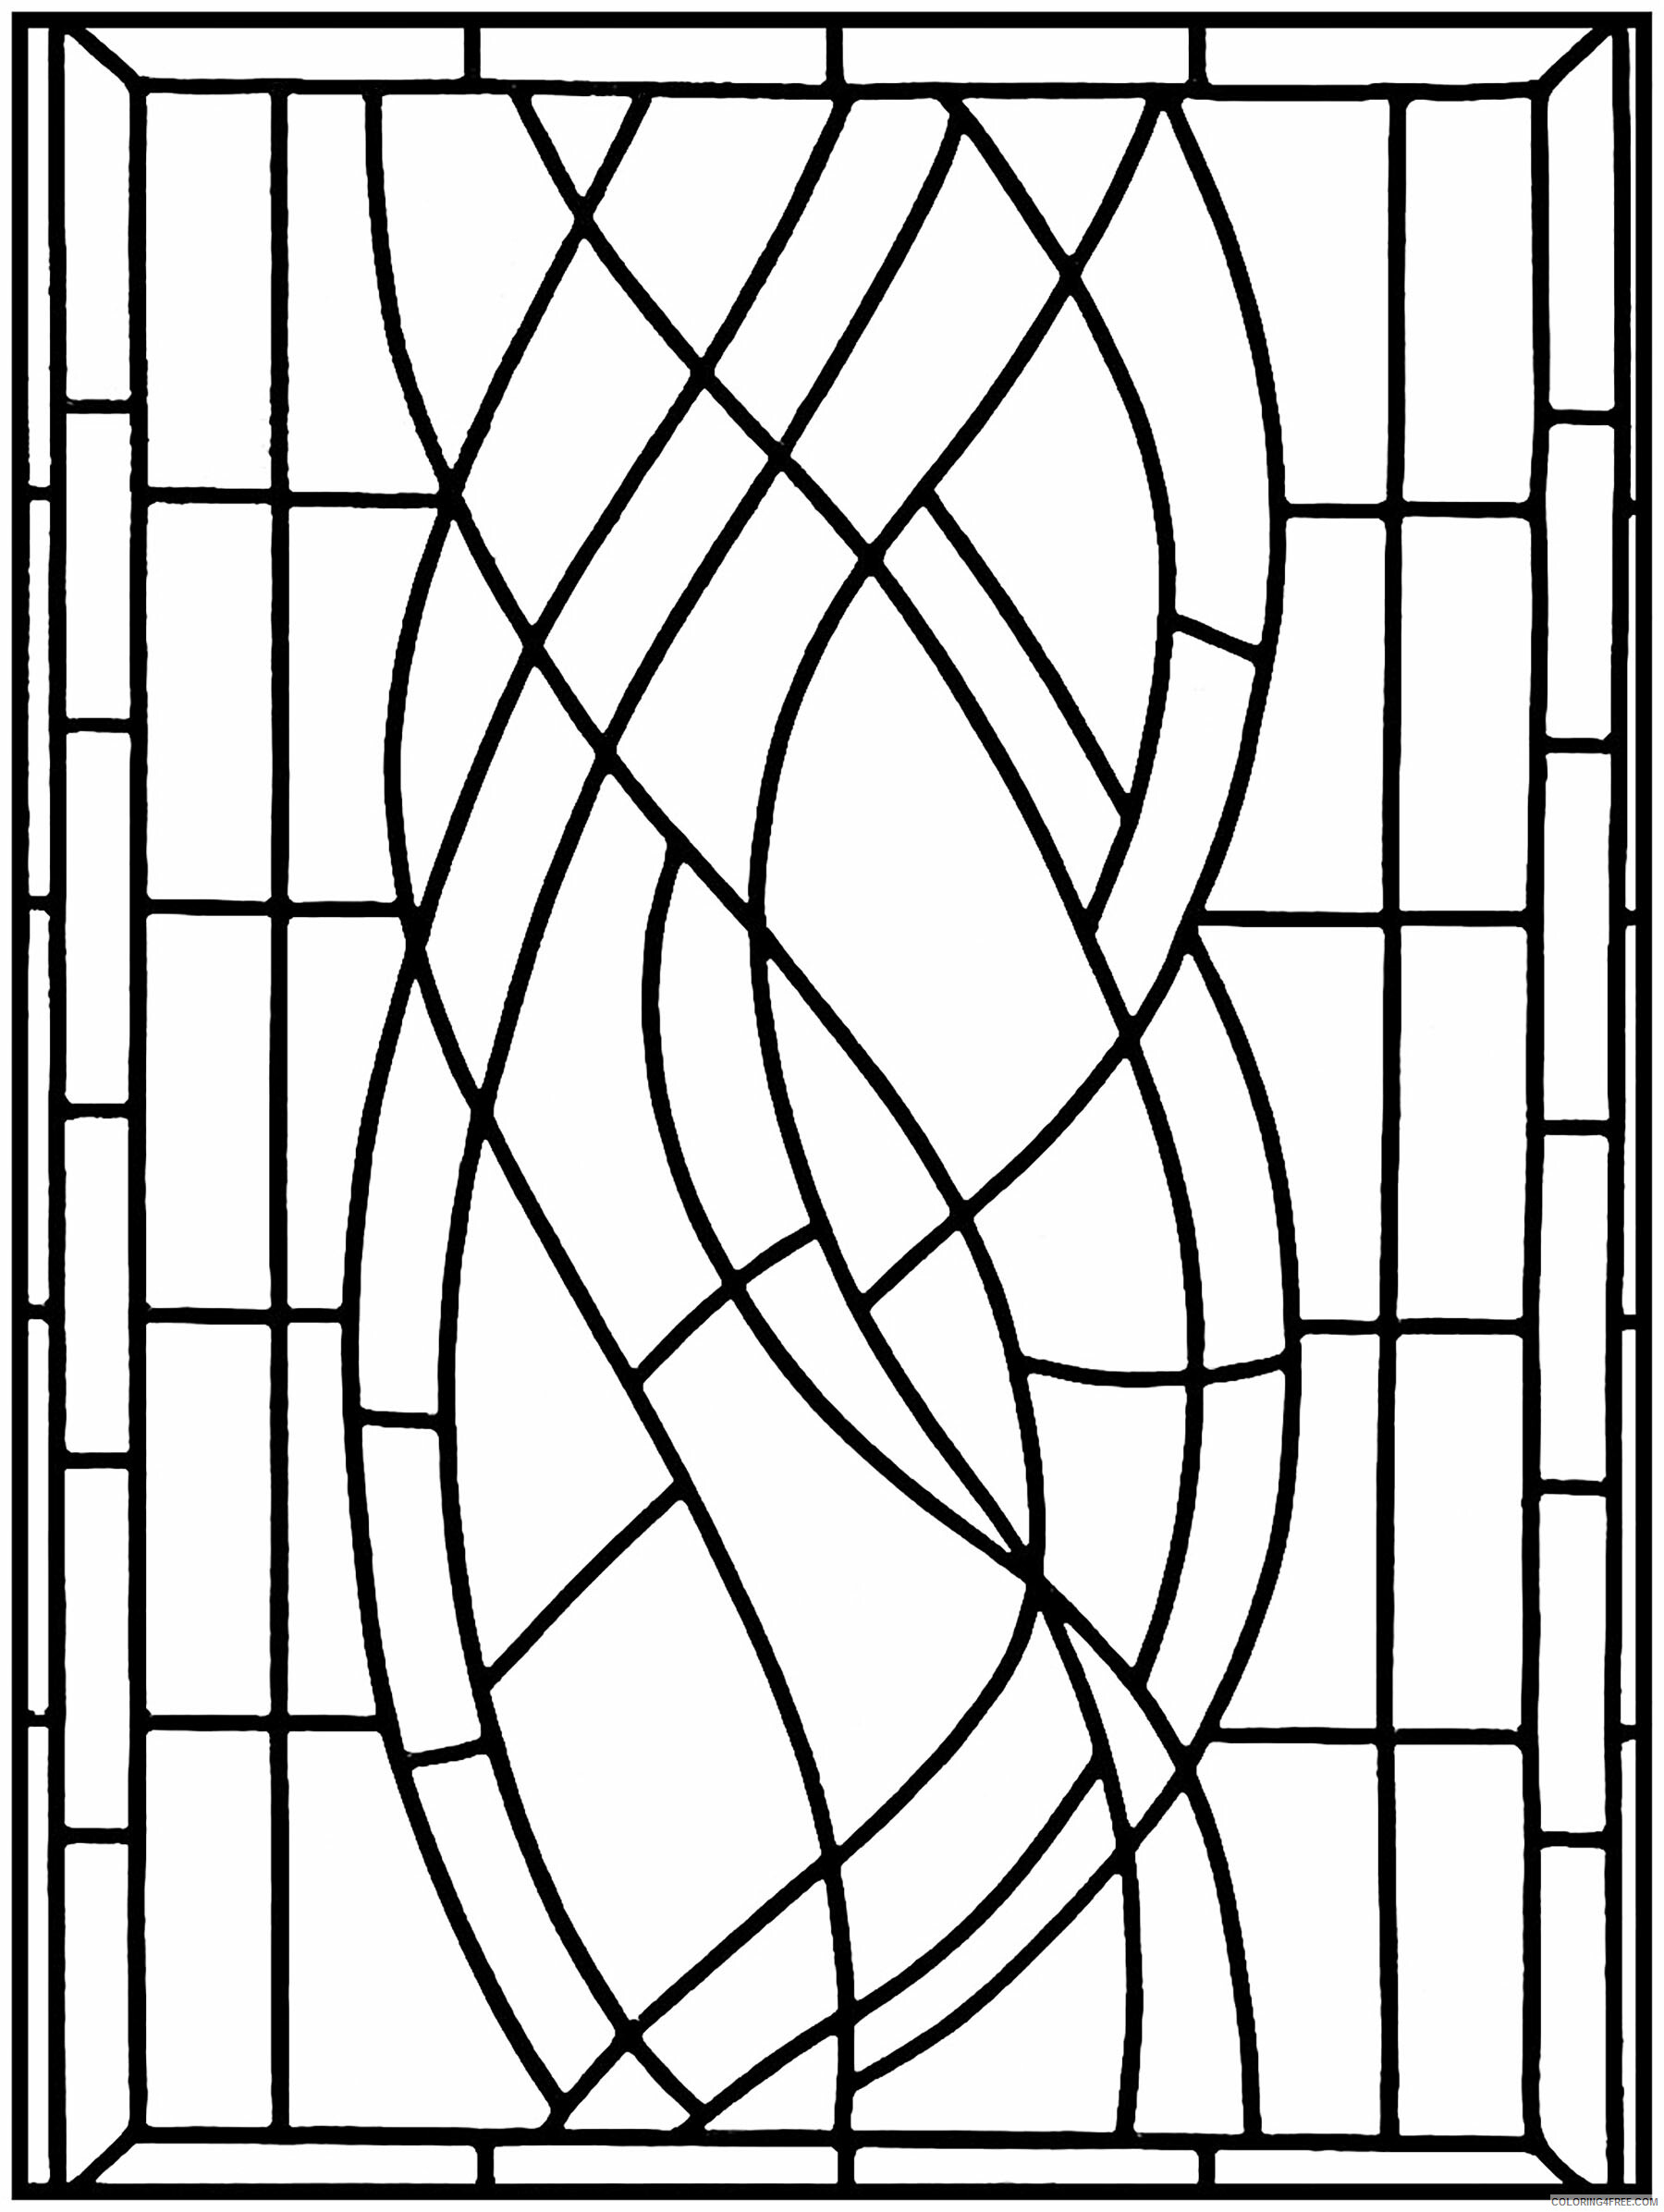 Printable Free Stained Glass Patterns High Resolution Printable